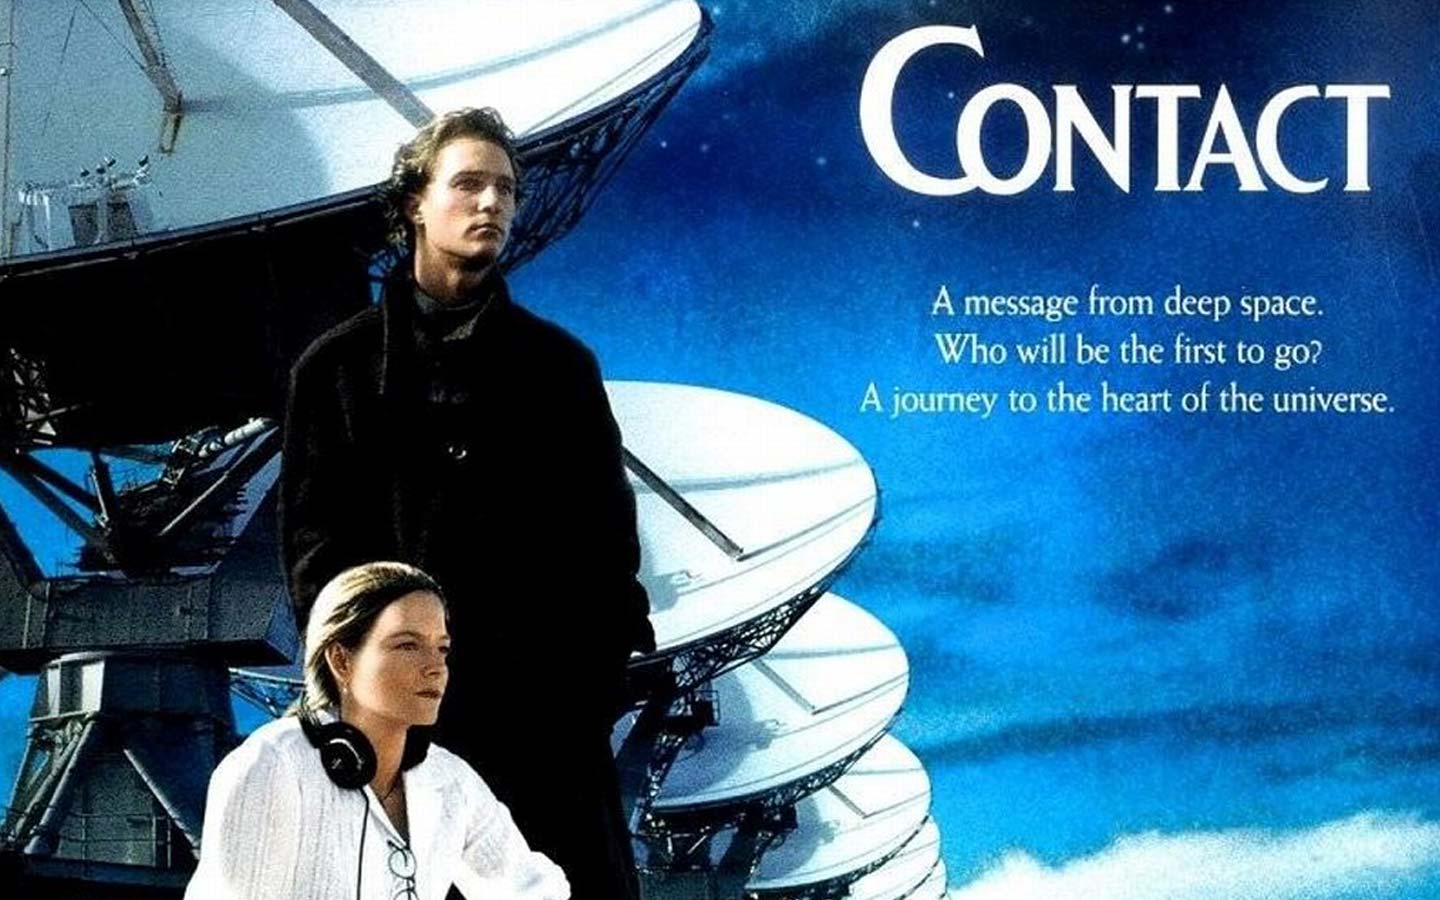 Contact the movie